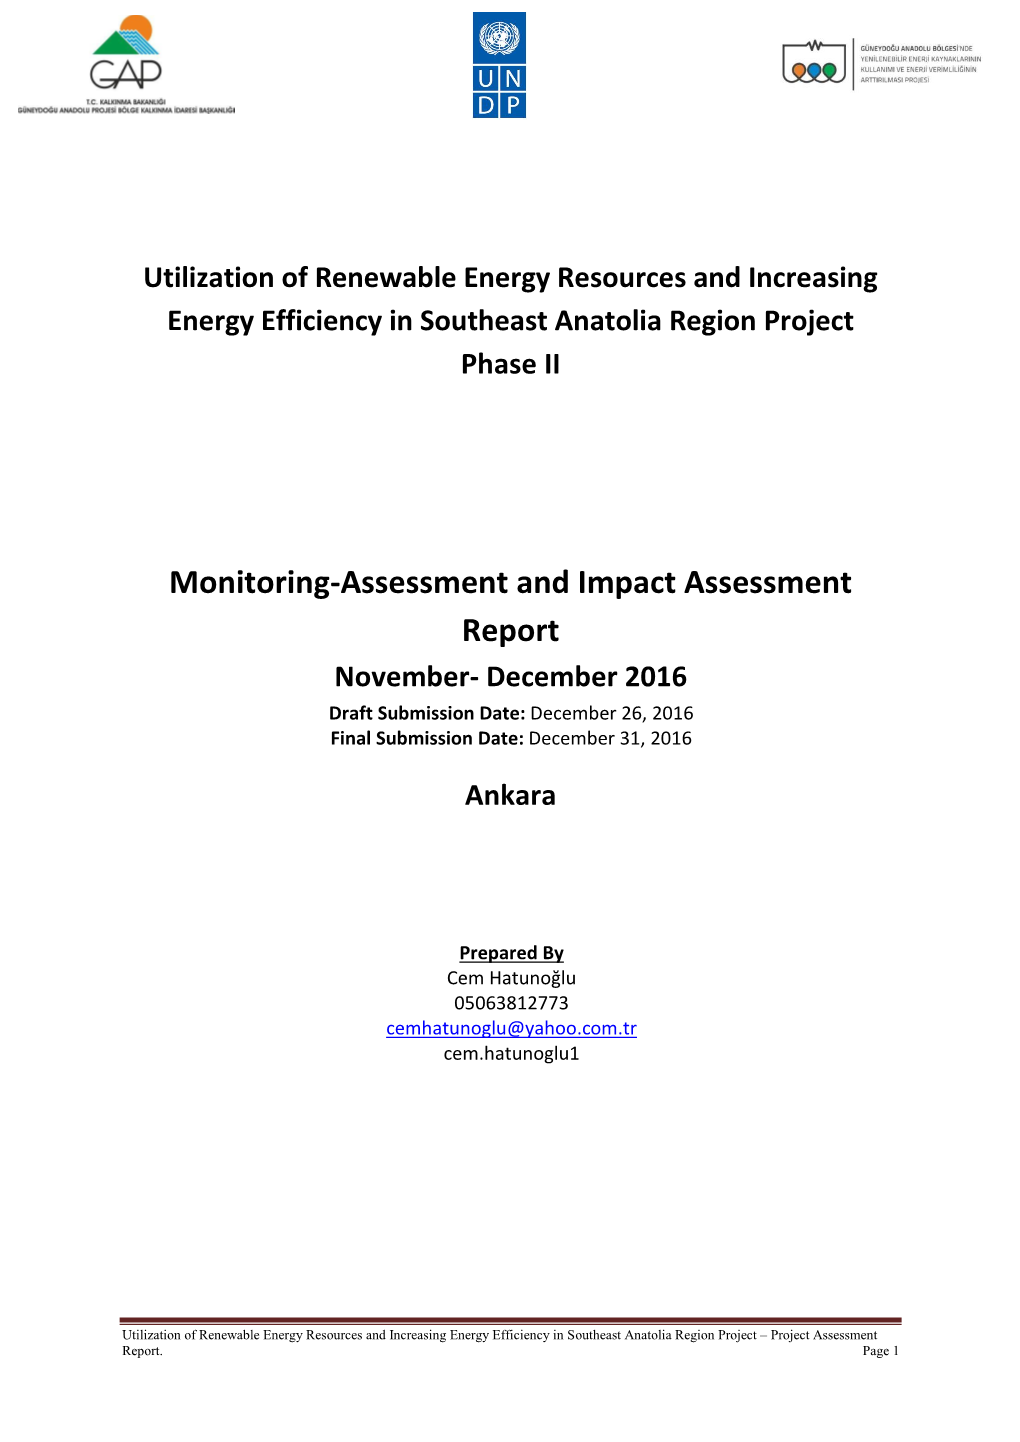 Utilization of Renewable Energy Resources and Increasing Energy Efficiency in Southeast Anatolia Region Project Phase II